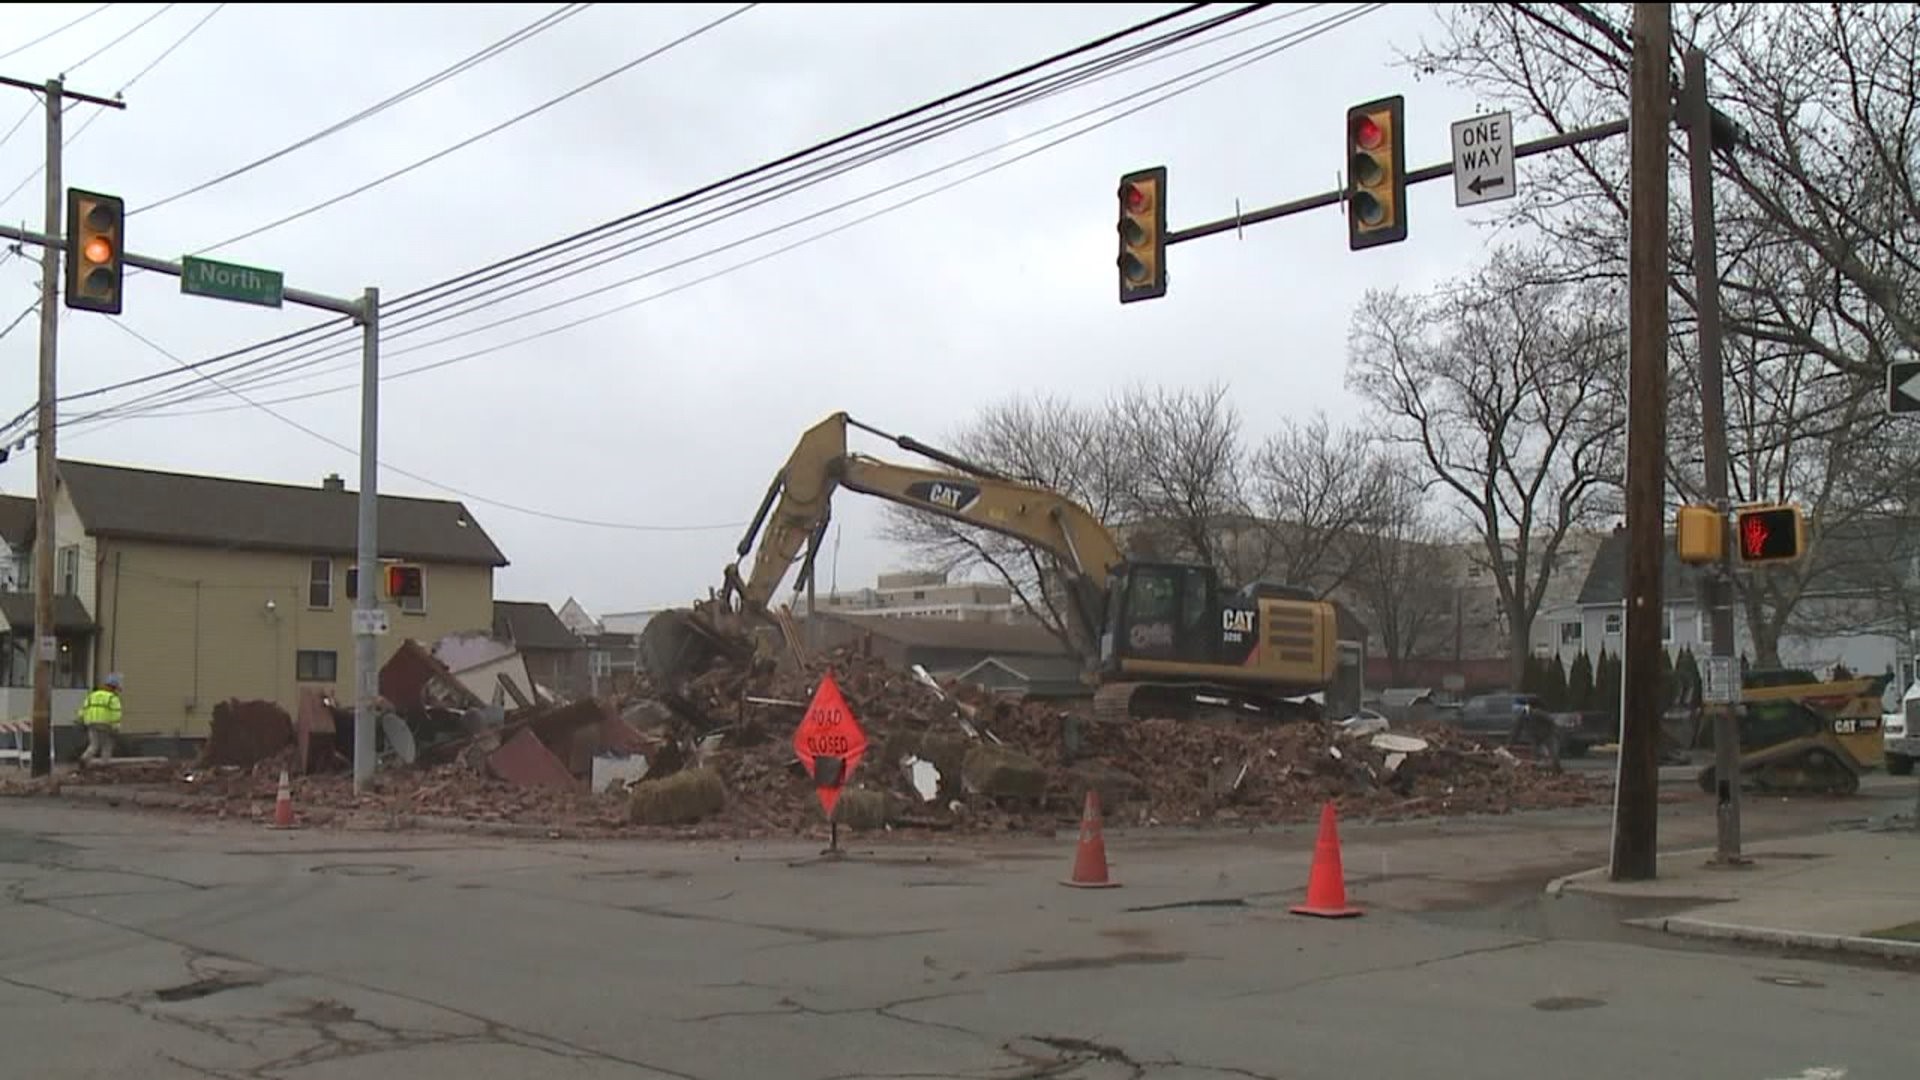 Vacant building in Wilkes-Barre torn down for safety reasons.